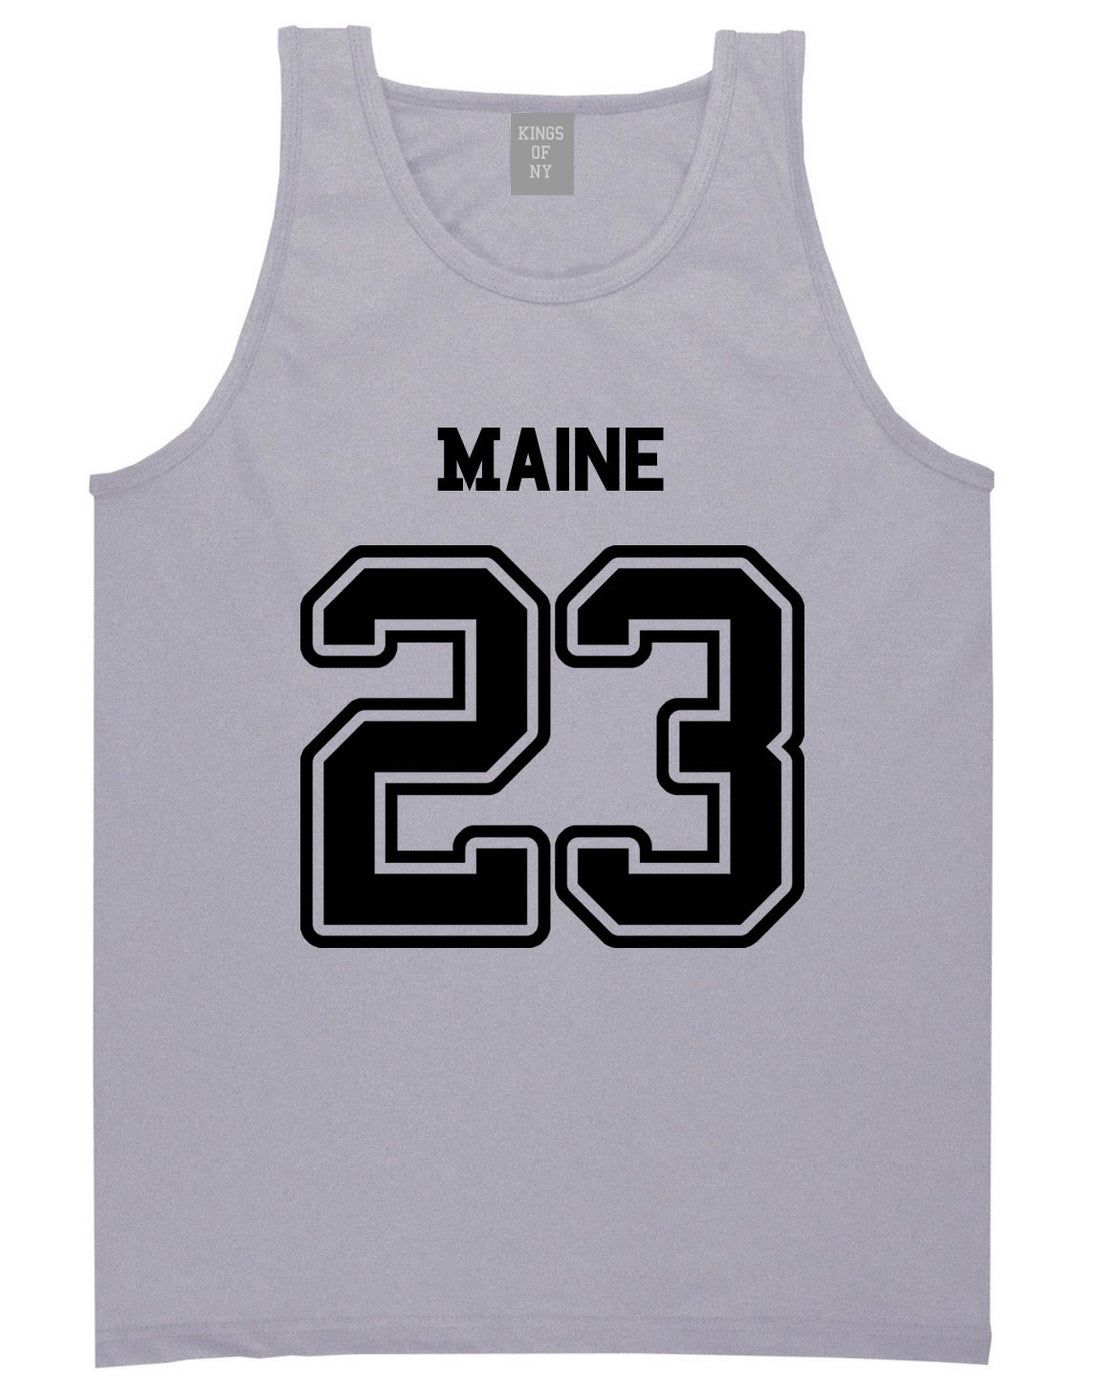 Sport Style Maine 23 Team State Jersey Mens Tank Top By Kings Of NY